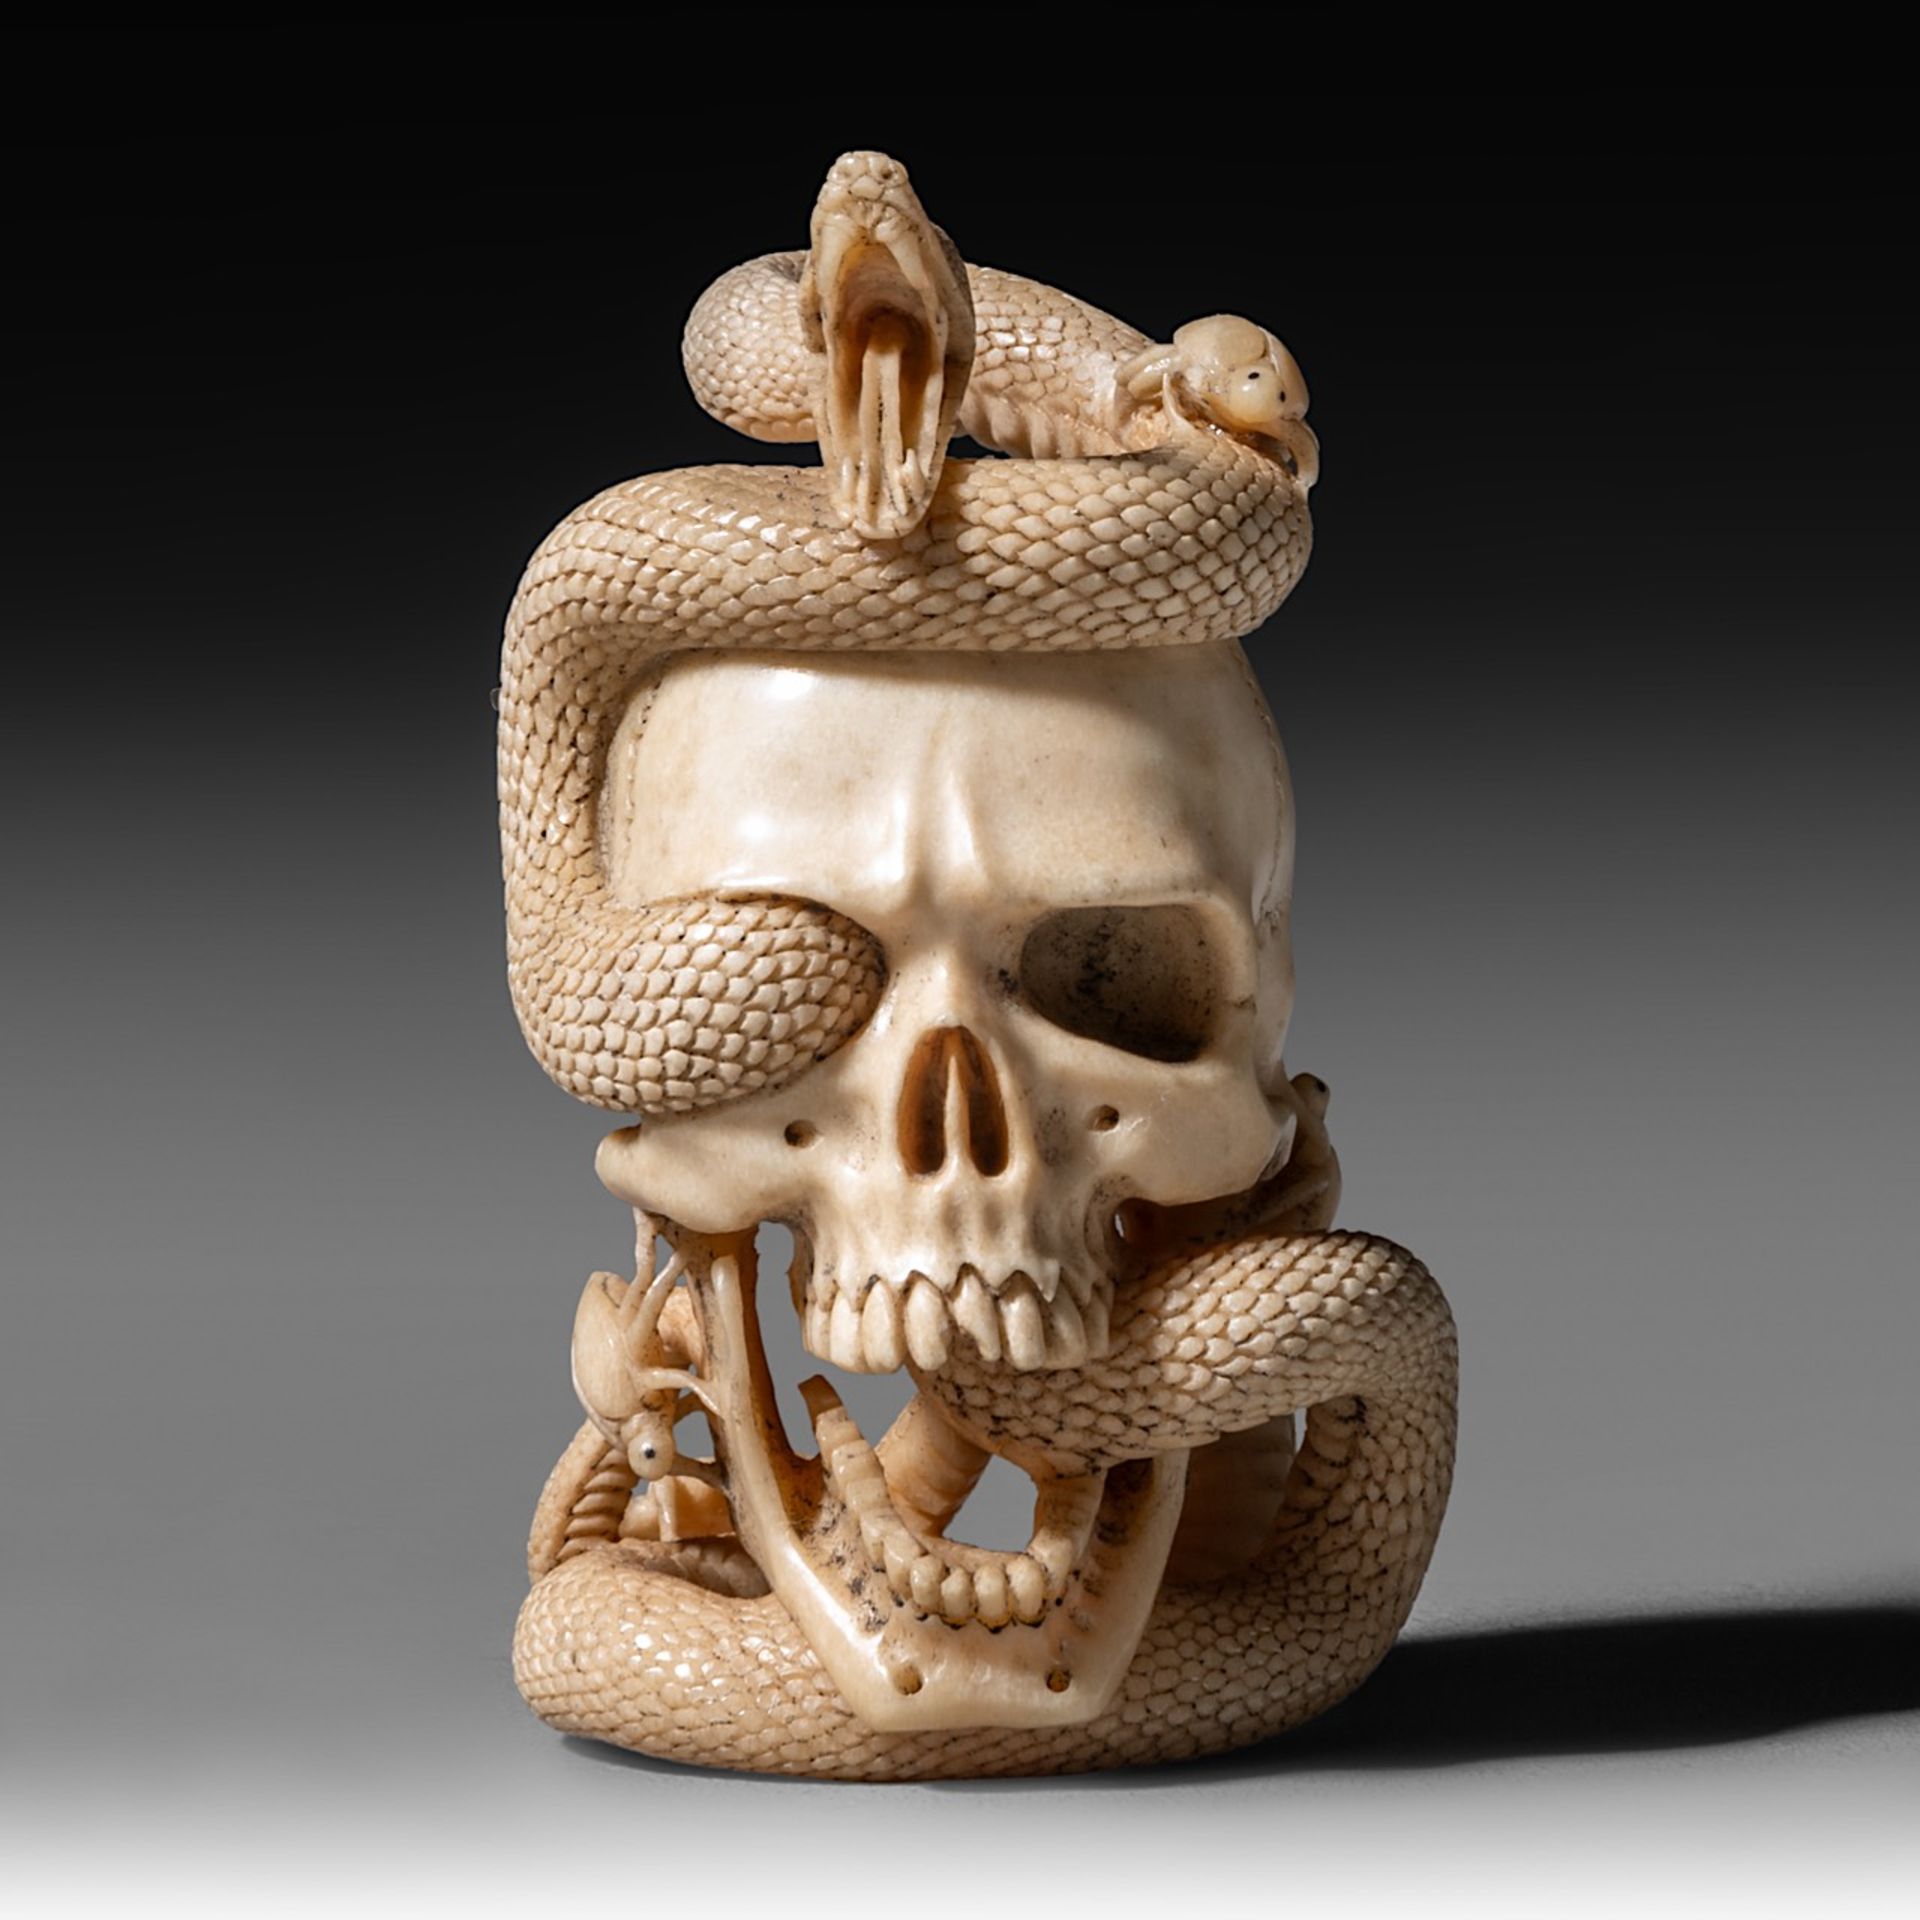 A (German) skull and snake sculpture, bone, 18th - 19th century, H 7,9 cm - weight 79 g